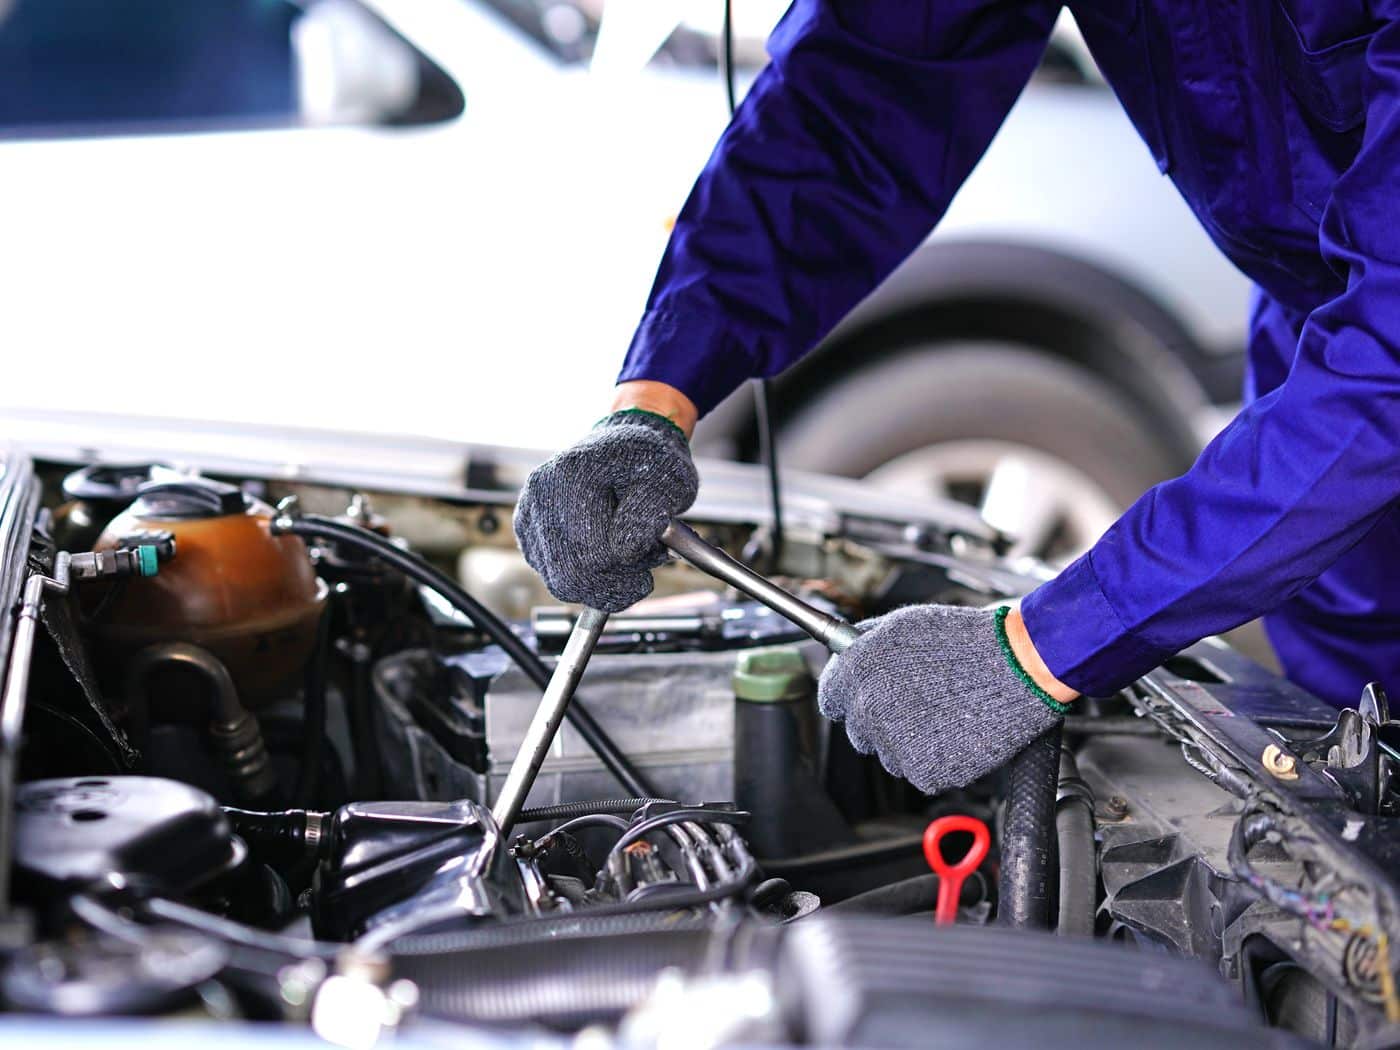 Auto Repair and Auto Leasing: Successful Businesses to Start